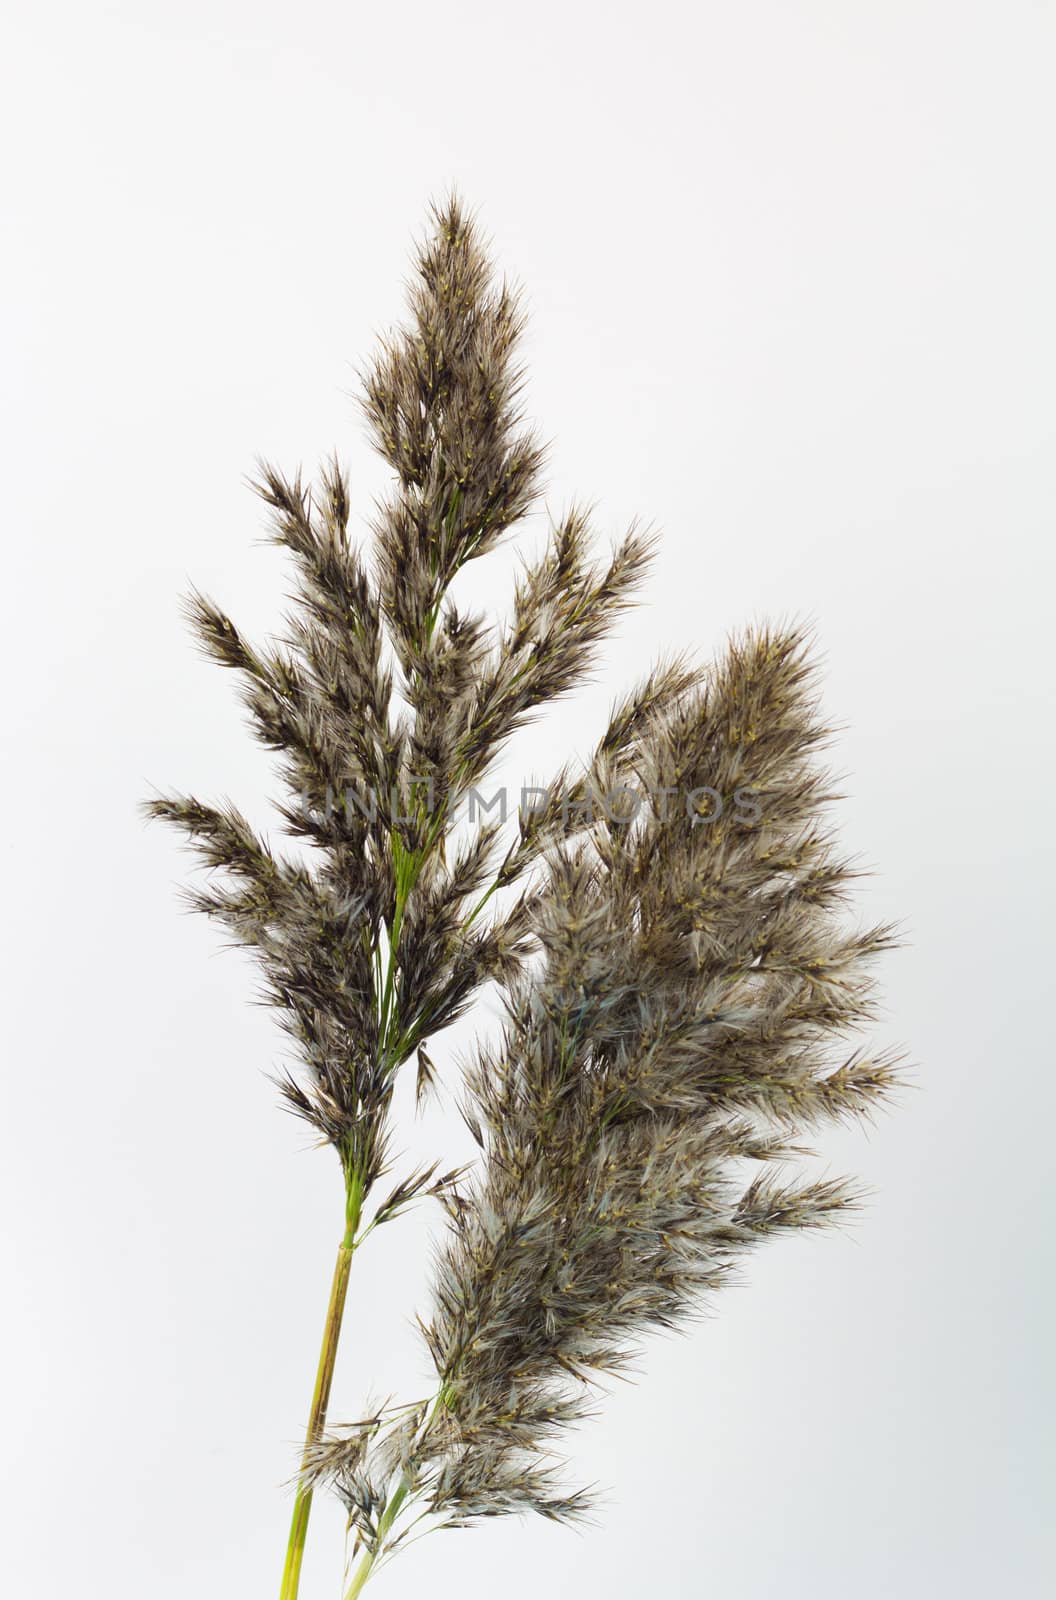 Grass in seed on a white background